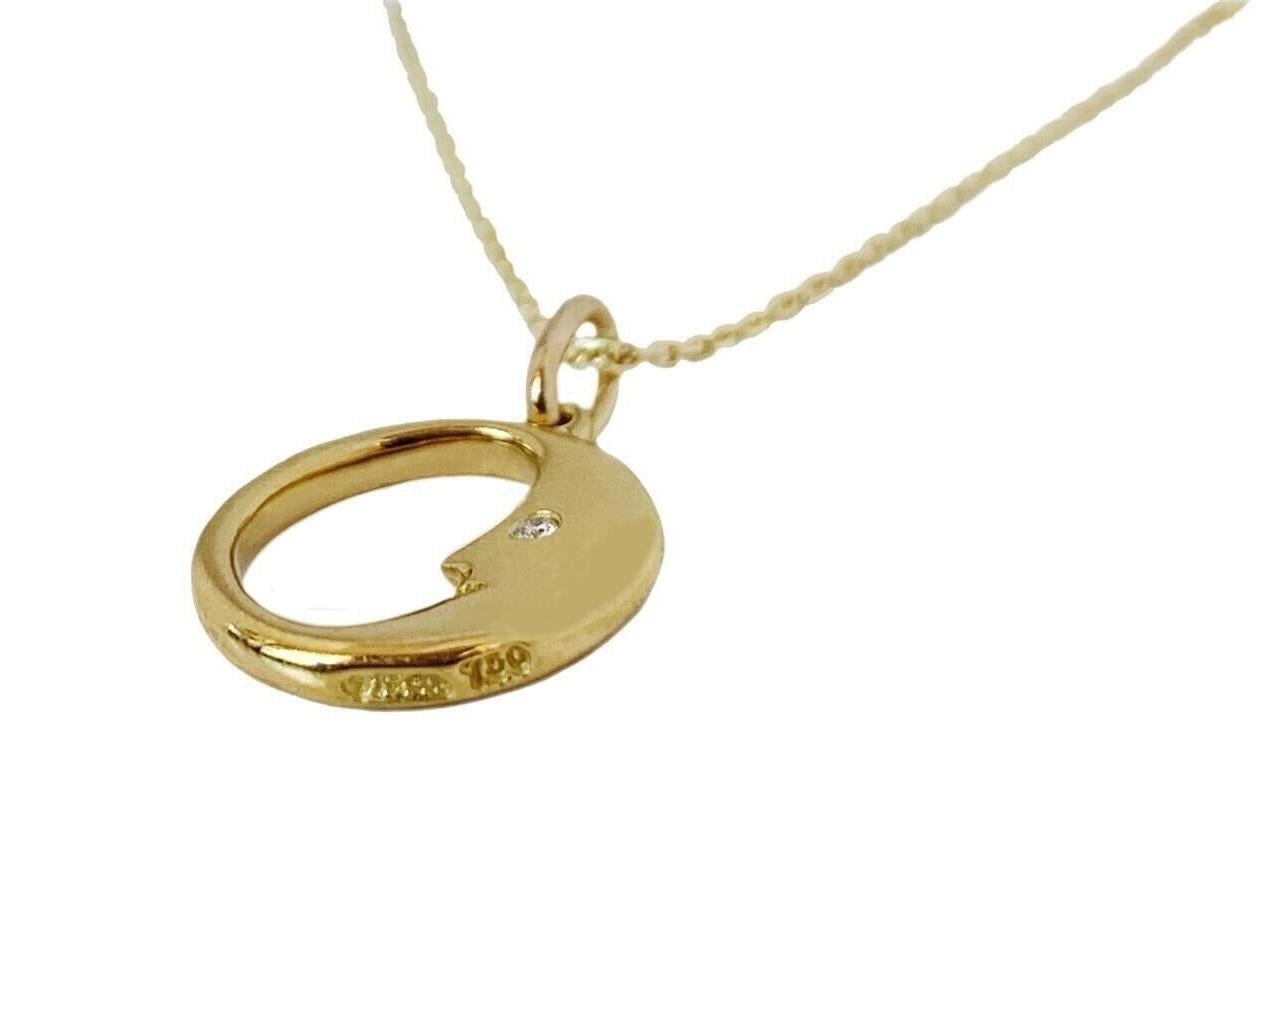 Mint condition
-18 k yellow gold
-Length: 16”
-Moon diameter: 0.5”
-Comes with Tiffany box